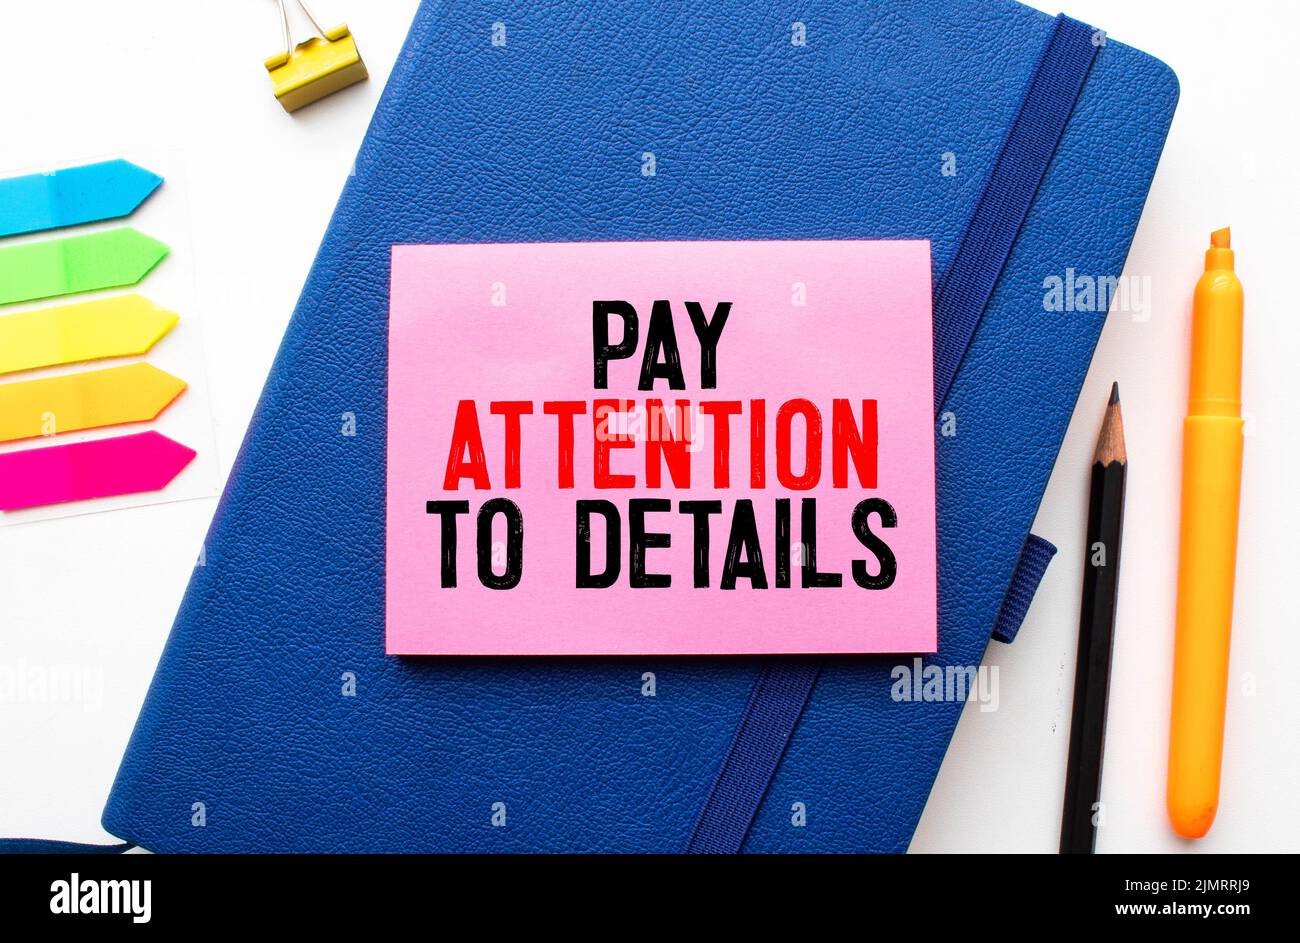 Word text Attention to detail on white paper background - business concept Stock Photo